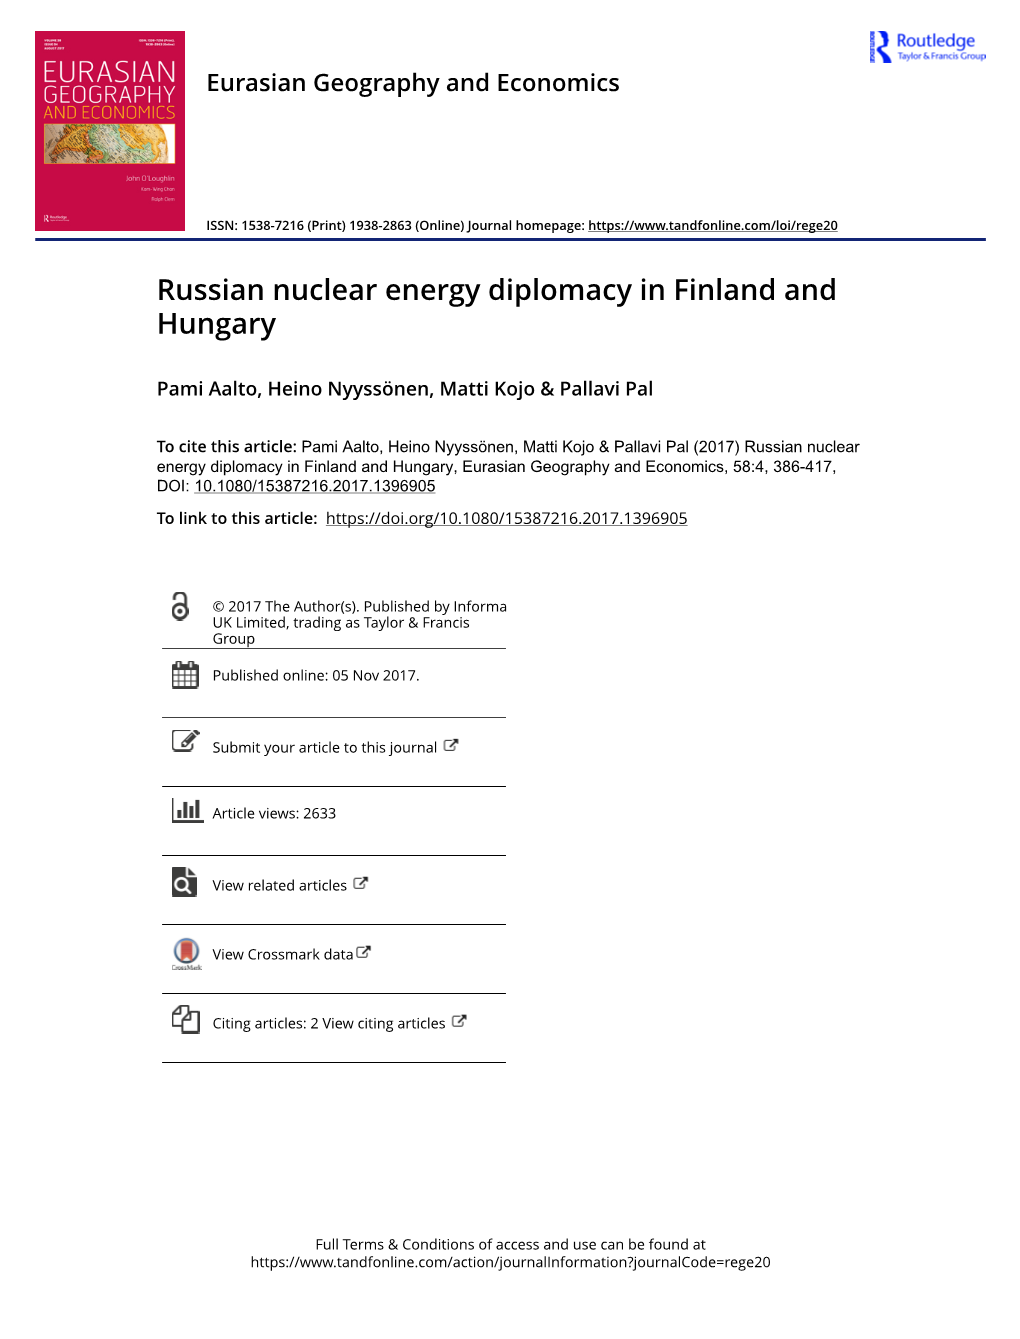 Russian Nuclear Energy Diplomacy in Finland and Hungary